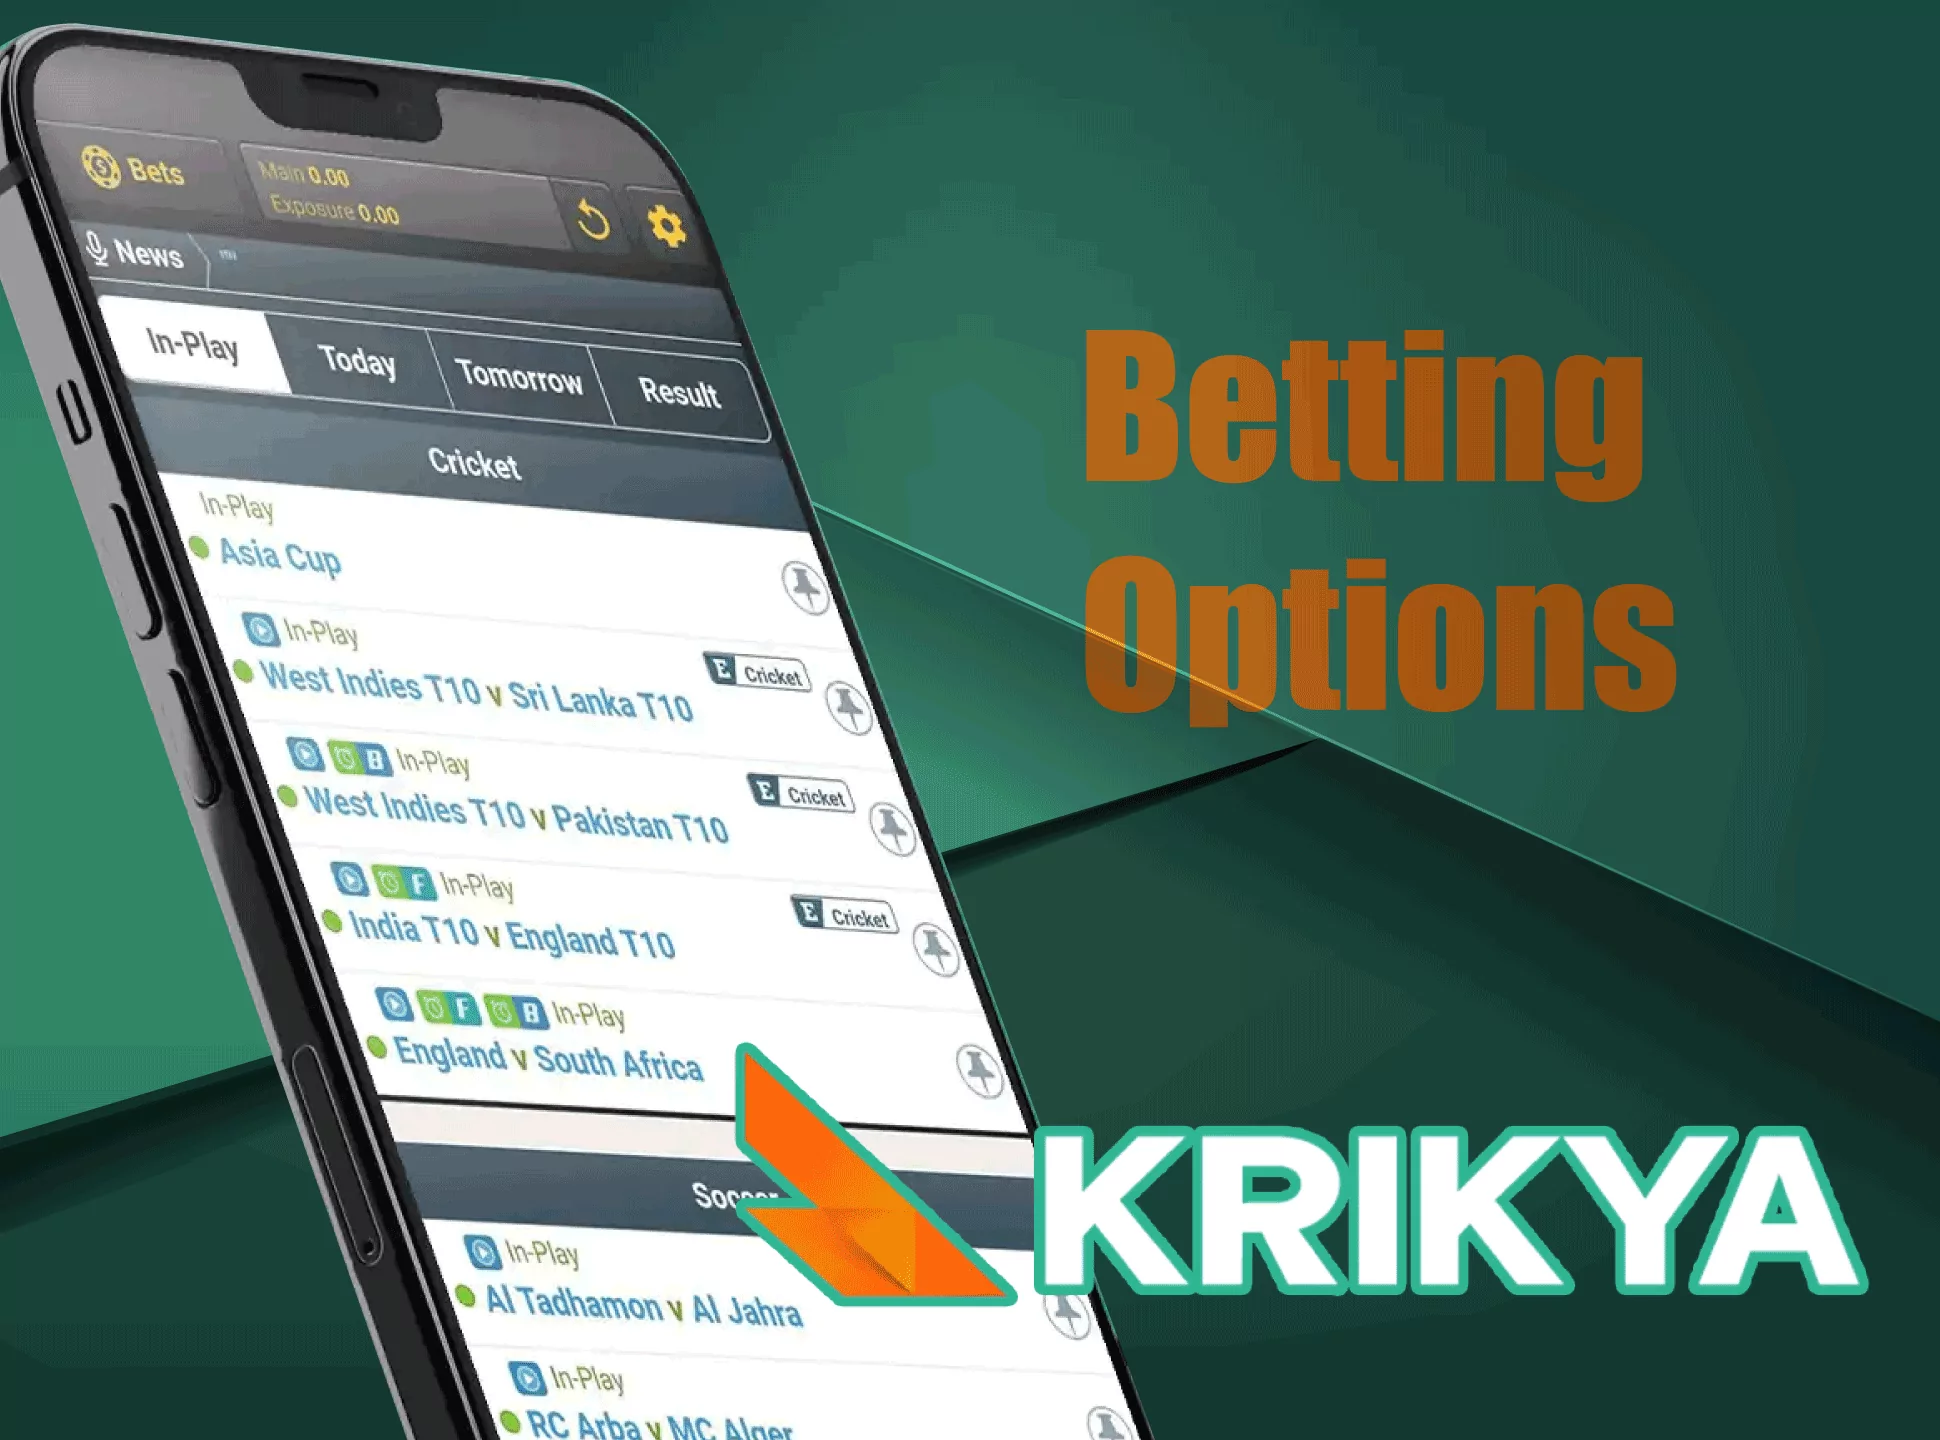 Place bets on prematch or live in the Krikya application.